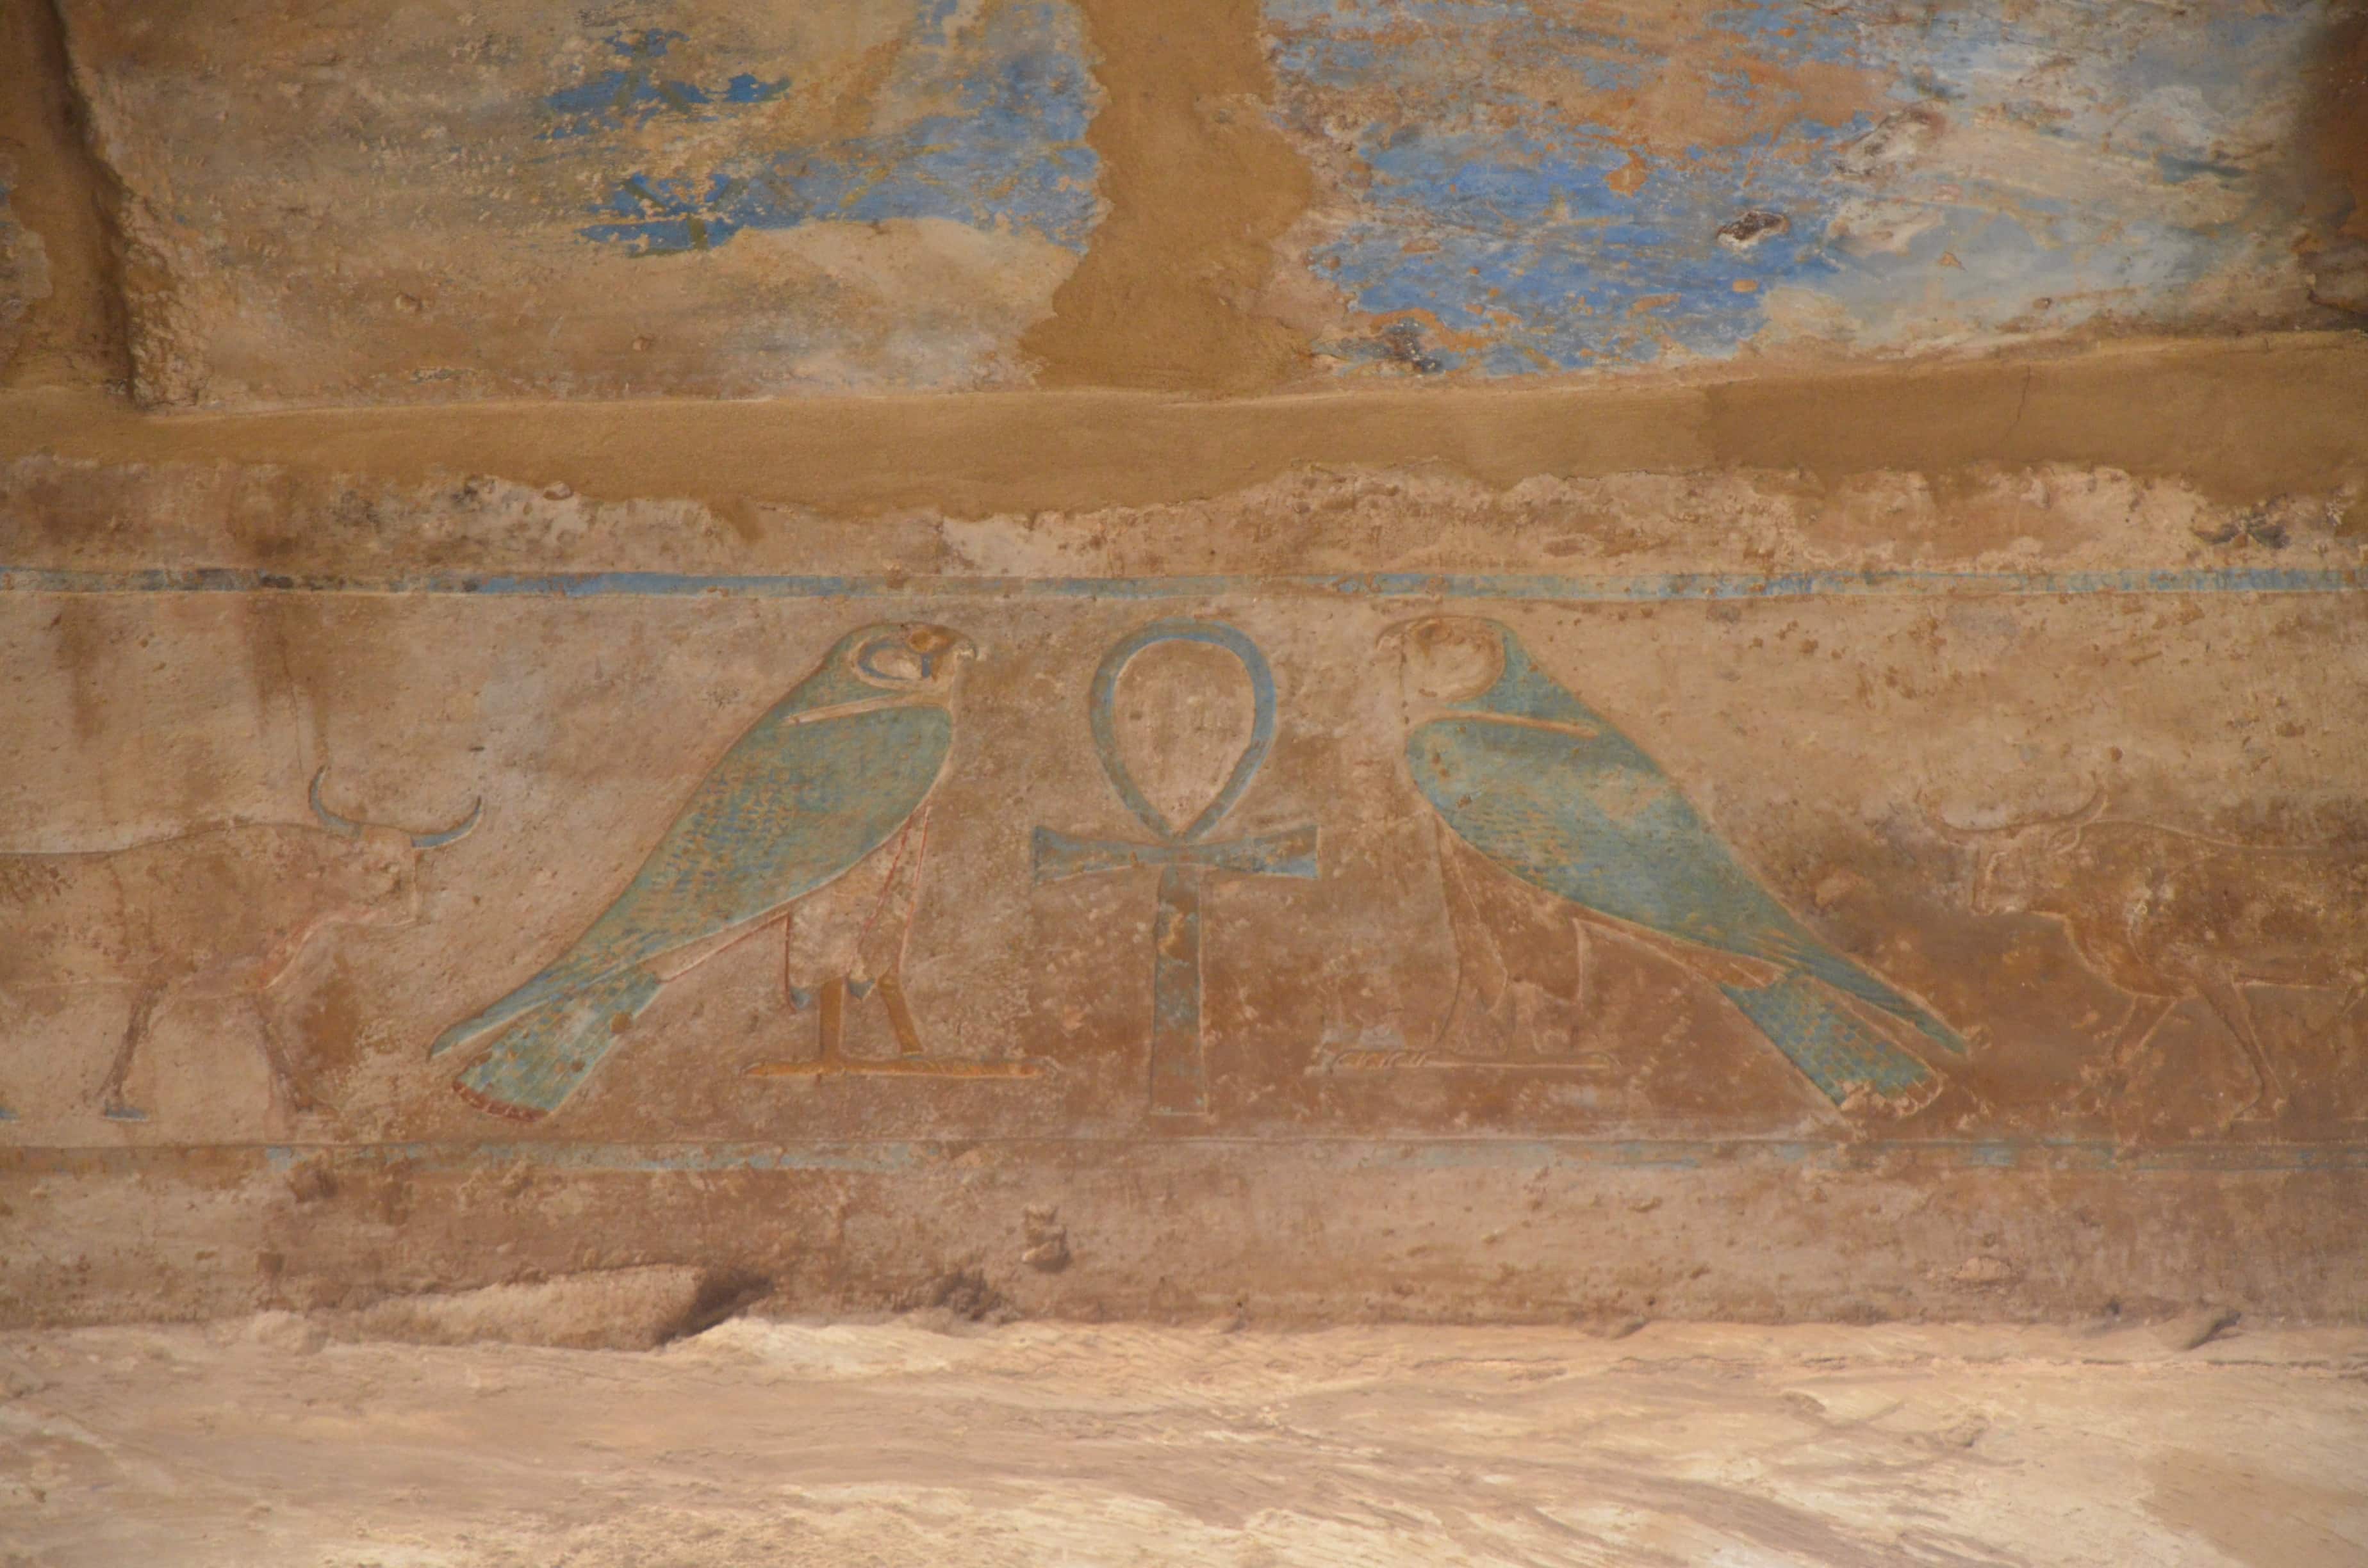 Hieroglyphics in the Festival Temple of Tuthmosis III